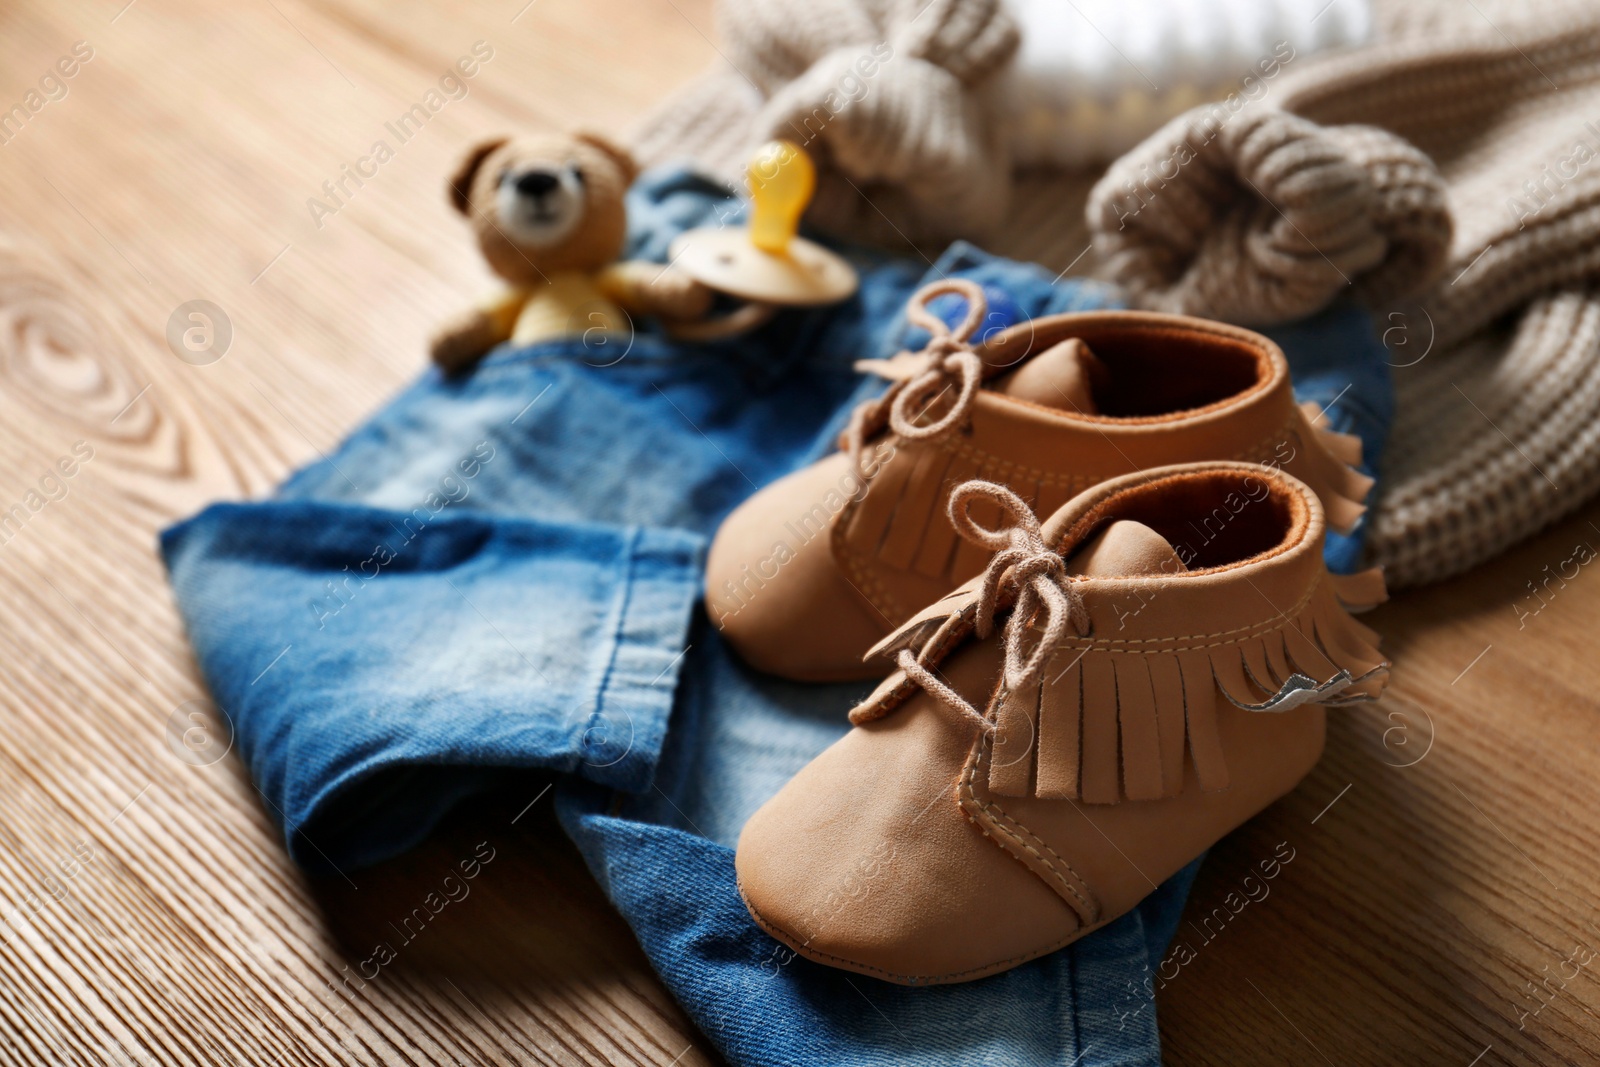 Photo of Children's shoes, clothes, toy and pacifier on wooden table